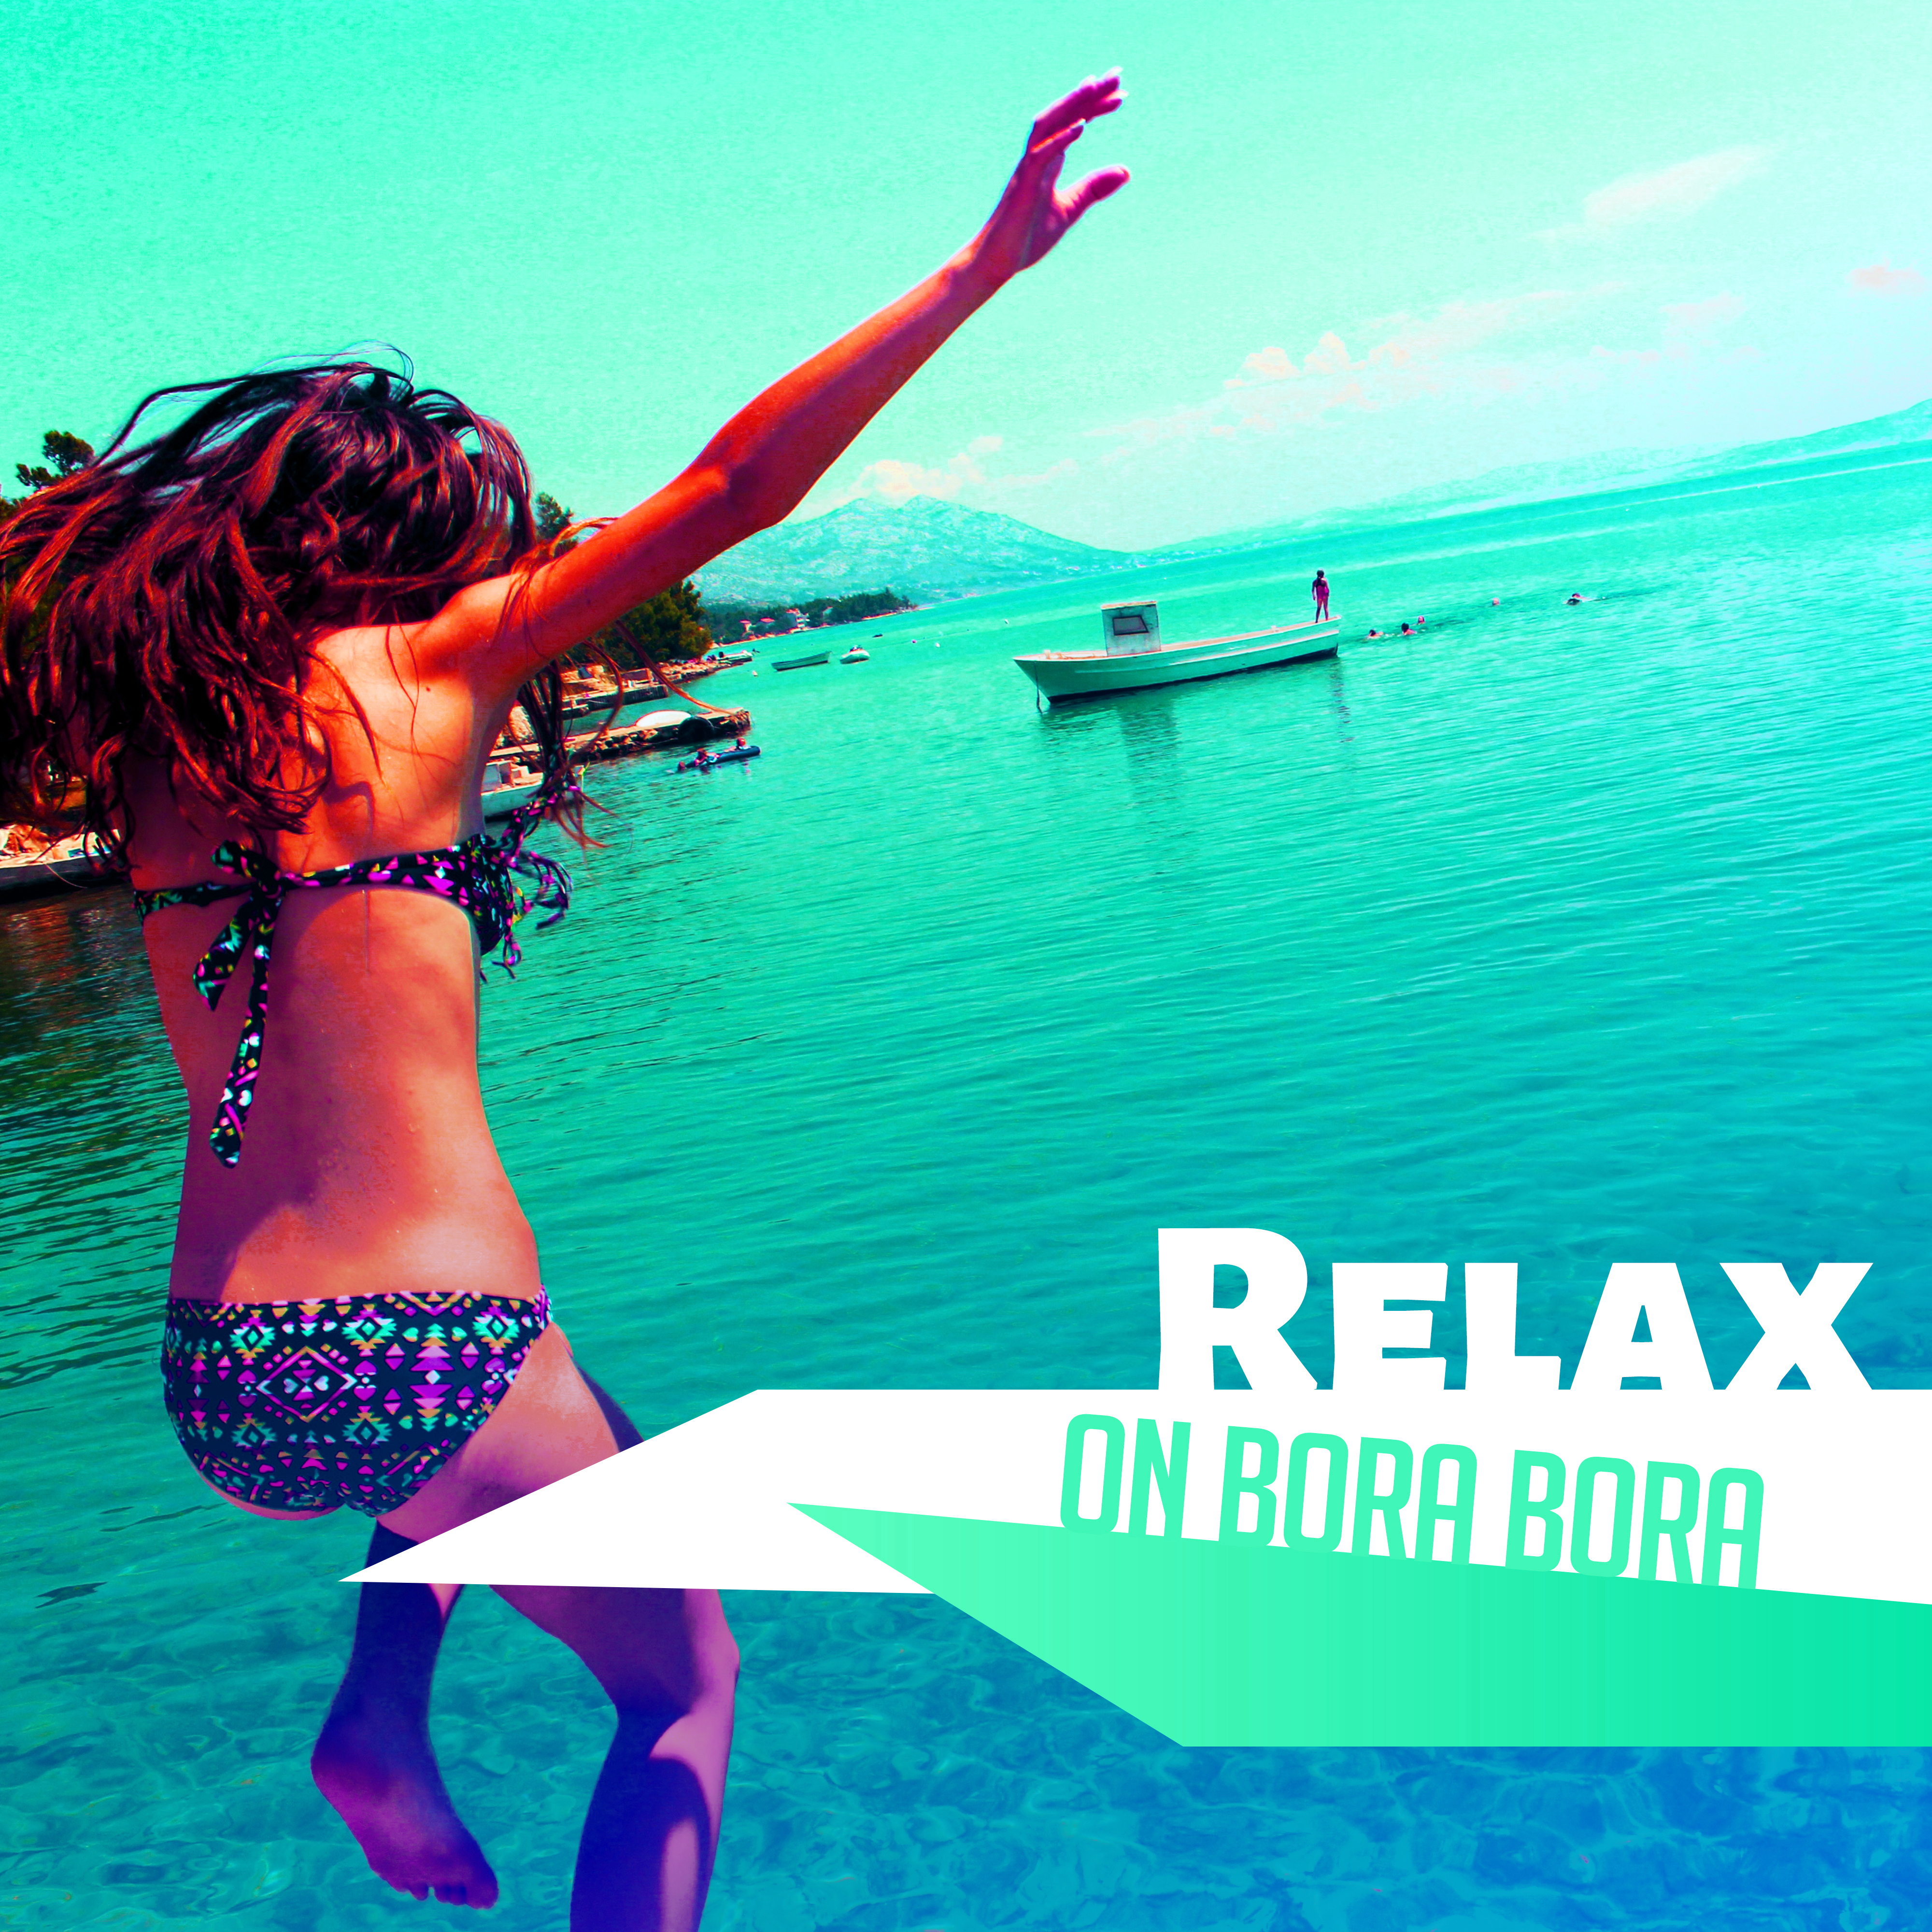 Relax on Bora Bora – Summer Lounge, Beach Chill, Party Night, Summertime, Deep Vibes, Relax, Free Time